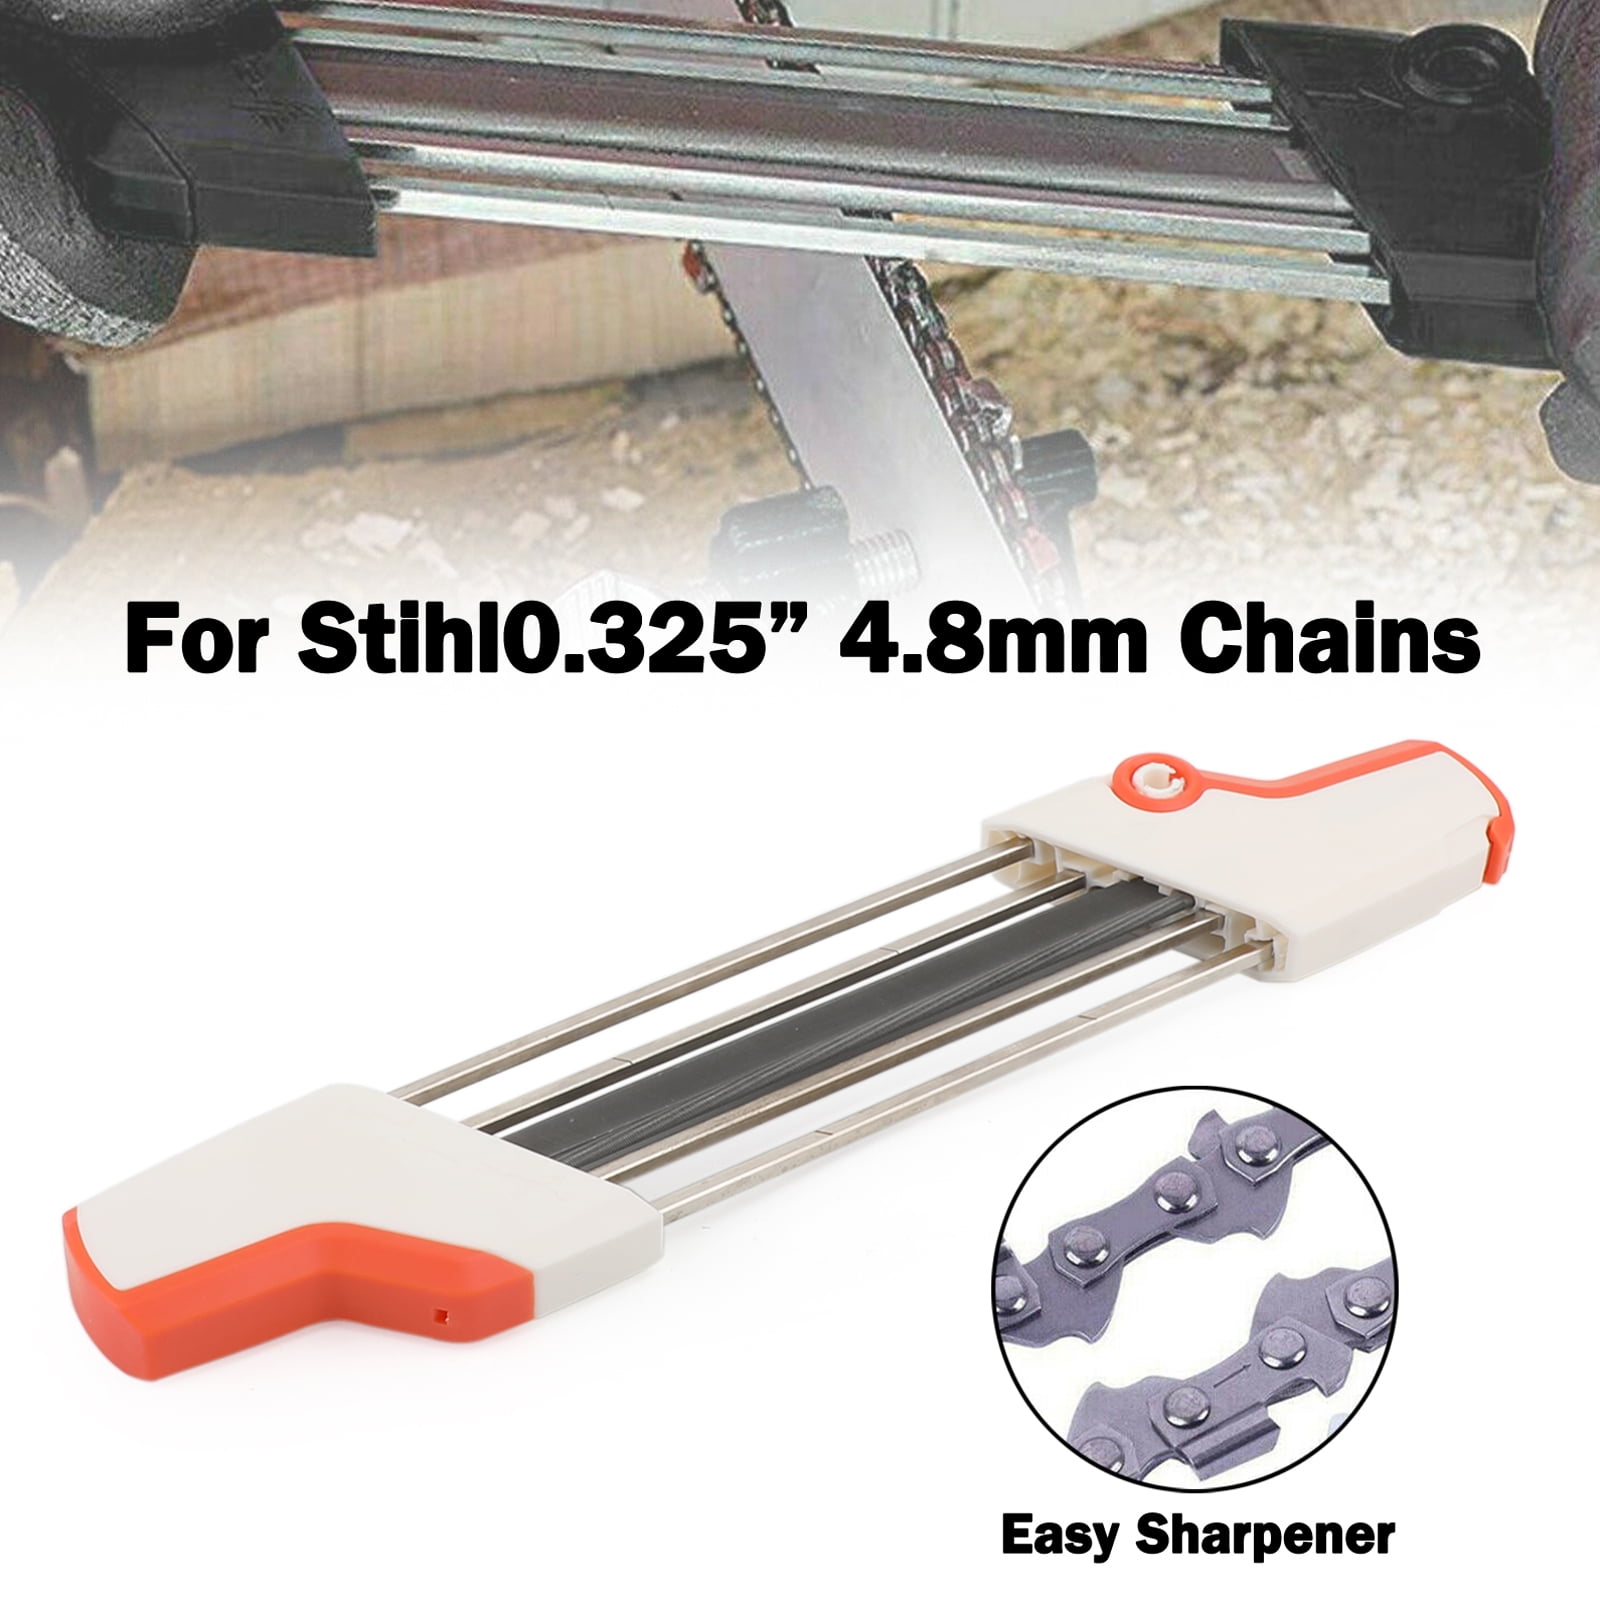 FILING KIT 1/8" 3.2 mm NEW Style STIHL 2N1 CHAINSAW 1/4" P CHAIN SHARPENING